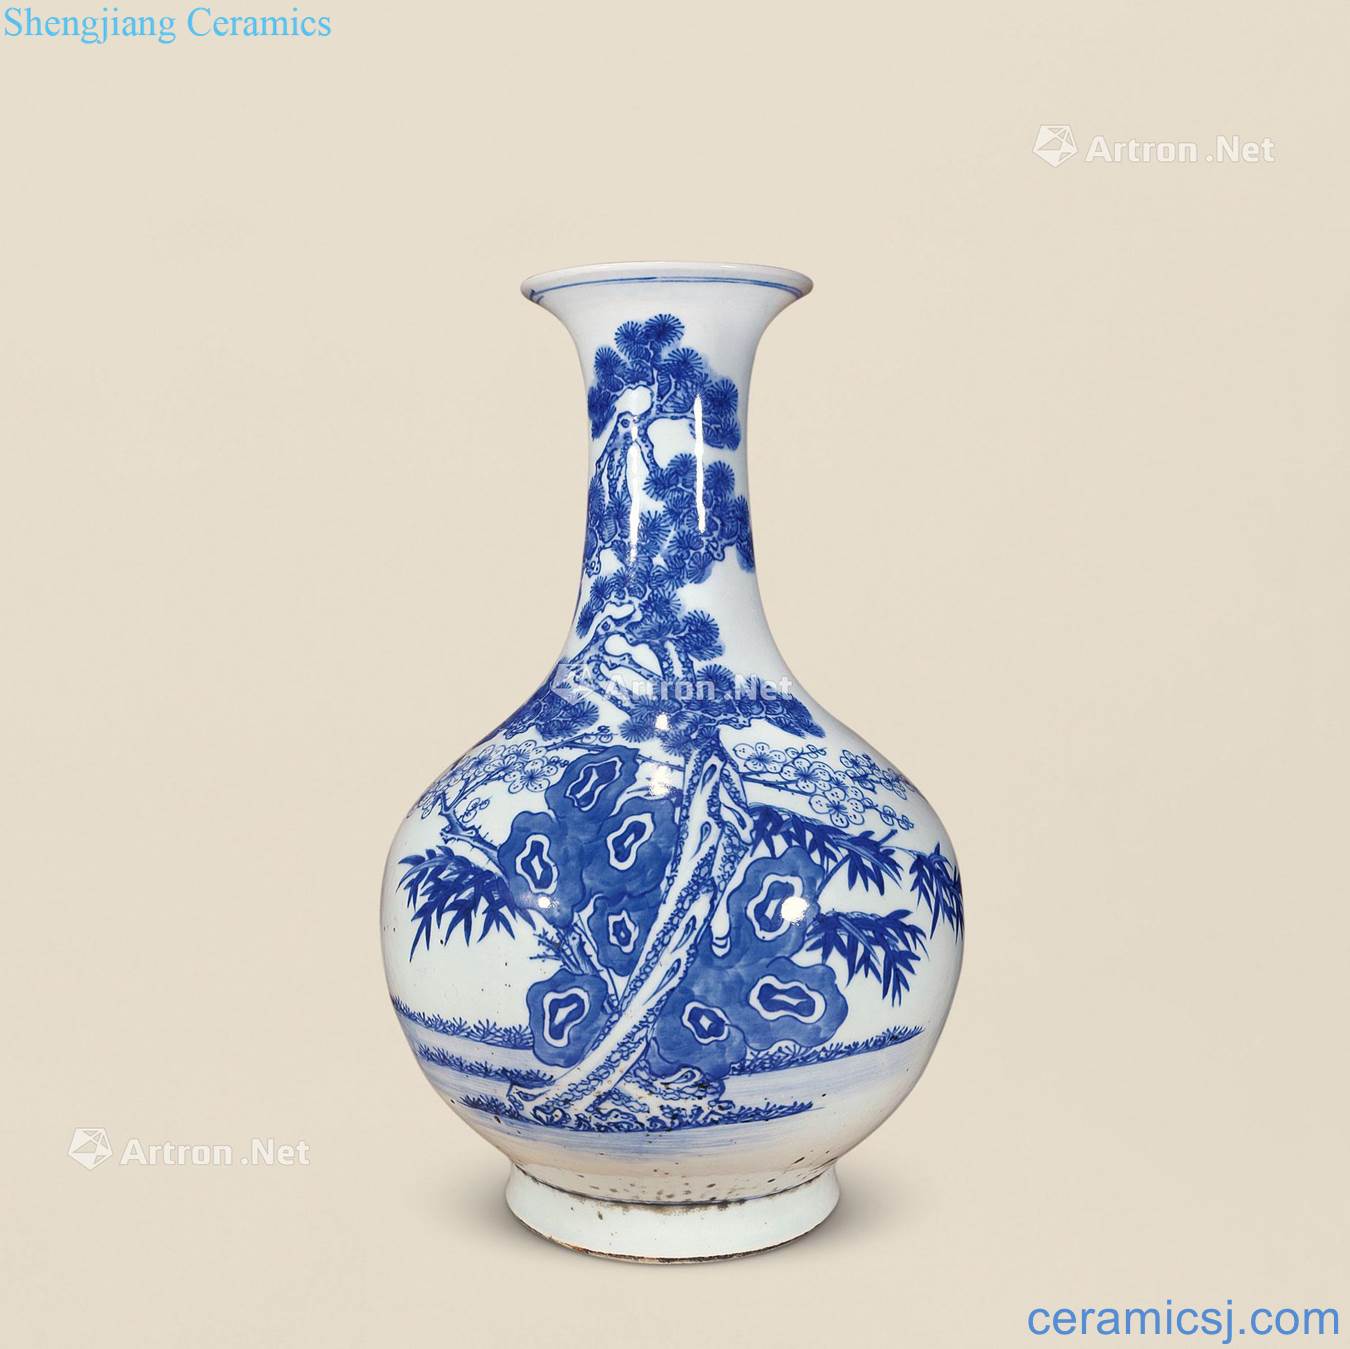 Qing daoguang Blue and white, poetic lines of the reward bottle